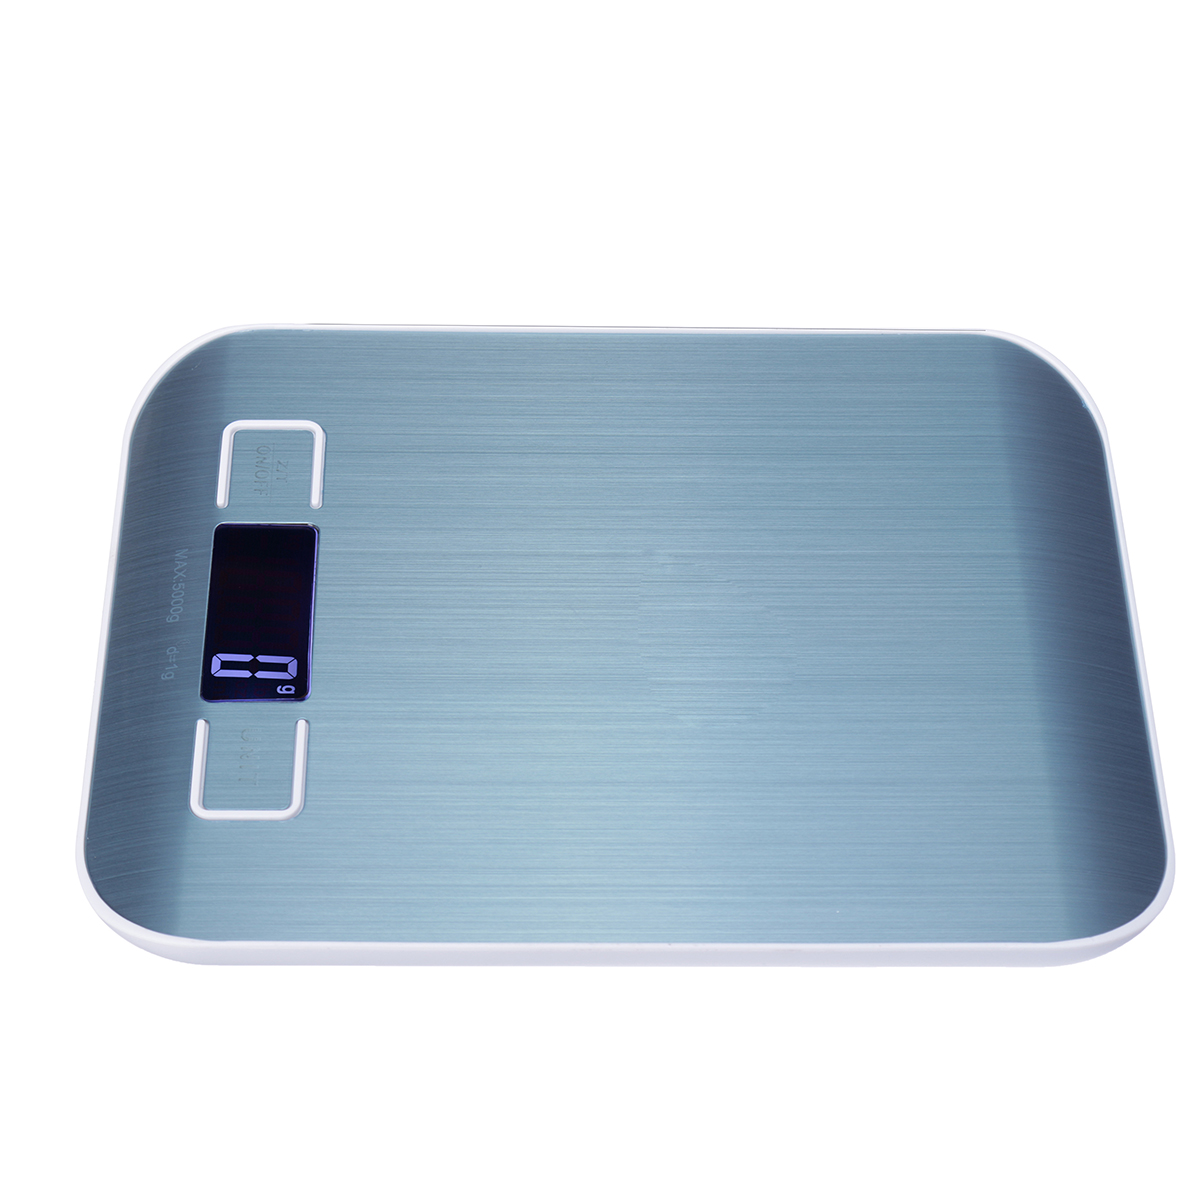 Digital-Kitchen-Scale-5kg1g-10kg1g-Food-Scale-Stainless-Steel-LCD-Display-Kitchen-Baking-Mesuring-To-1582787-1